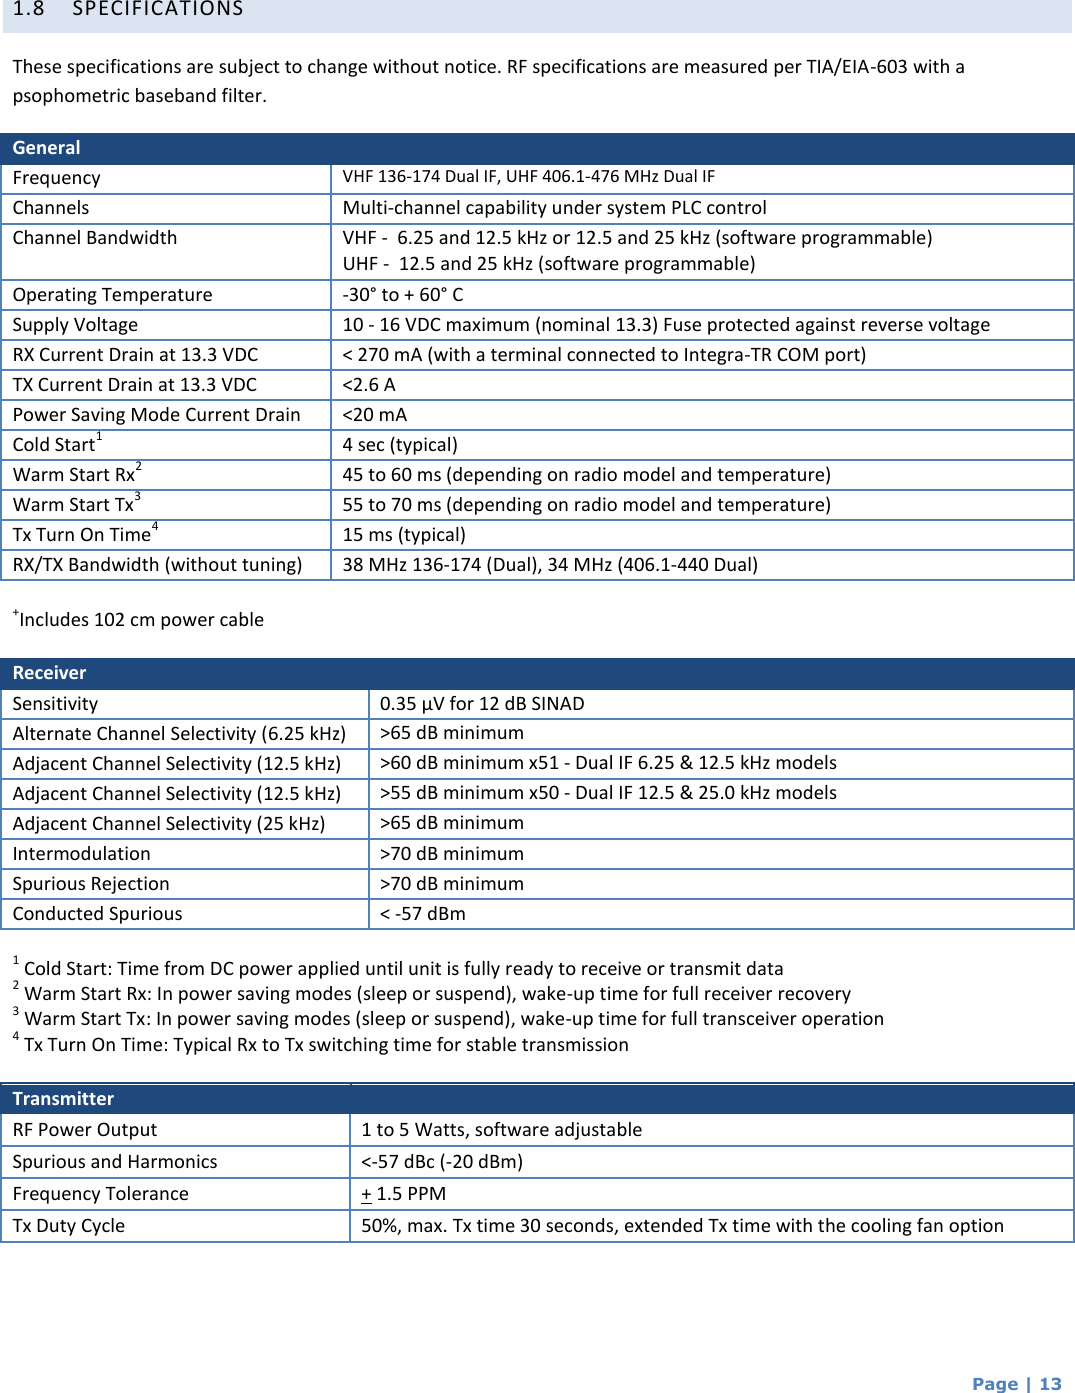  Page | 13   1.8 SPECIFICATIONS These specifications are subject to change without notice. RF specifications are measured per TIA/EIA-603 with a psophometric baseband filter. General  Frequency VHF 136-174 Dual IF, UHF 406.1-476 MHz Dual IF Channels Multi-channel capability under system PLC control Channel Bandwidth VHF -  6.25 and 12.5 kHz or 12.5 and 25 kHz (software programmable) UHF -  12.5 and 25 kHz (software programmable)  Operating Temperature -30° to + 60° C Supply Voltage 10 - 16 VDC maximum (nominal 13.3) Fuse protected against reverse voltage (internal surface mount 3A fuse: not field replaceable) RX Current Drain at 13.3 VDC &lt; 270 mA (with a terminal connected to Integra-TR COM port) TX Current Drain at 13.3 VDC &lt;2.6 A Power Saving Mode Current Drain &lt;20 mA Cold Start1 4 sec (typical) Warm Start Rx2 45 to 60 ms (depending on radio model and temperature) Warm Start Tx3 55 to 70 ms (depending on radio model and temperature) Tx Turn On Time4 15 ms (typical) RX/TX Bandwidth (without tuning) 38 MHz 136-174 (Dual), 34 MHz (406.1-440 Dual) 36 MHz (440-476 Dual)  +Includes 102 cm power cable  Receiver  Sensitivity 0.35 µV for 12 dB SINAD Alternate Channel Selectivity (6.25 kHz)  &gt;65 dB minimum  Adjacent Channel Selectivity (12.5 kHz) &gt;60 dB minimum x51 - Dual IF 6.25 &amp; 12.5 kHz models  Adjacent Channel Selectivity (12.5 kHz) &gt;55 dB minimum x50 - Dual IF 12.5 &amp; 25.0 kHz models  Adjacent Channel Selectivity (25 kHz)  &gt;65 dB minimum  Intermodulation  &gt;70 dB minimum Spurious Rejection &gt;70 dB minimum Conducted Spurious  &lt; -57 dBm  1 Cold Start: Time from DC power applied until unit is fully ready to receive or transmit data 2 Warm Start Rx: In power saving modes (sleep or suspend), wake-up time for full receiver recovery 3 Warm Start Tx: In power saving modes (sleep or suspend), wake-up time for full transceiver operation 4 Tx Turn On Time: Typical Rx to Tx switching time for stable transmission  Transmitter  RF Power Output  1 to 5 Watts, software adjustable Spurious and Harmonics  &lt;-57 dBc (-20 dBm) Frequency Tolerance + 1.5 PPM Tx Duty Cycle  50%, max. Tx time 30 seconds, extended Tx time with the cooling fan option    